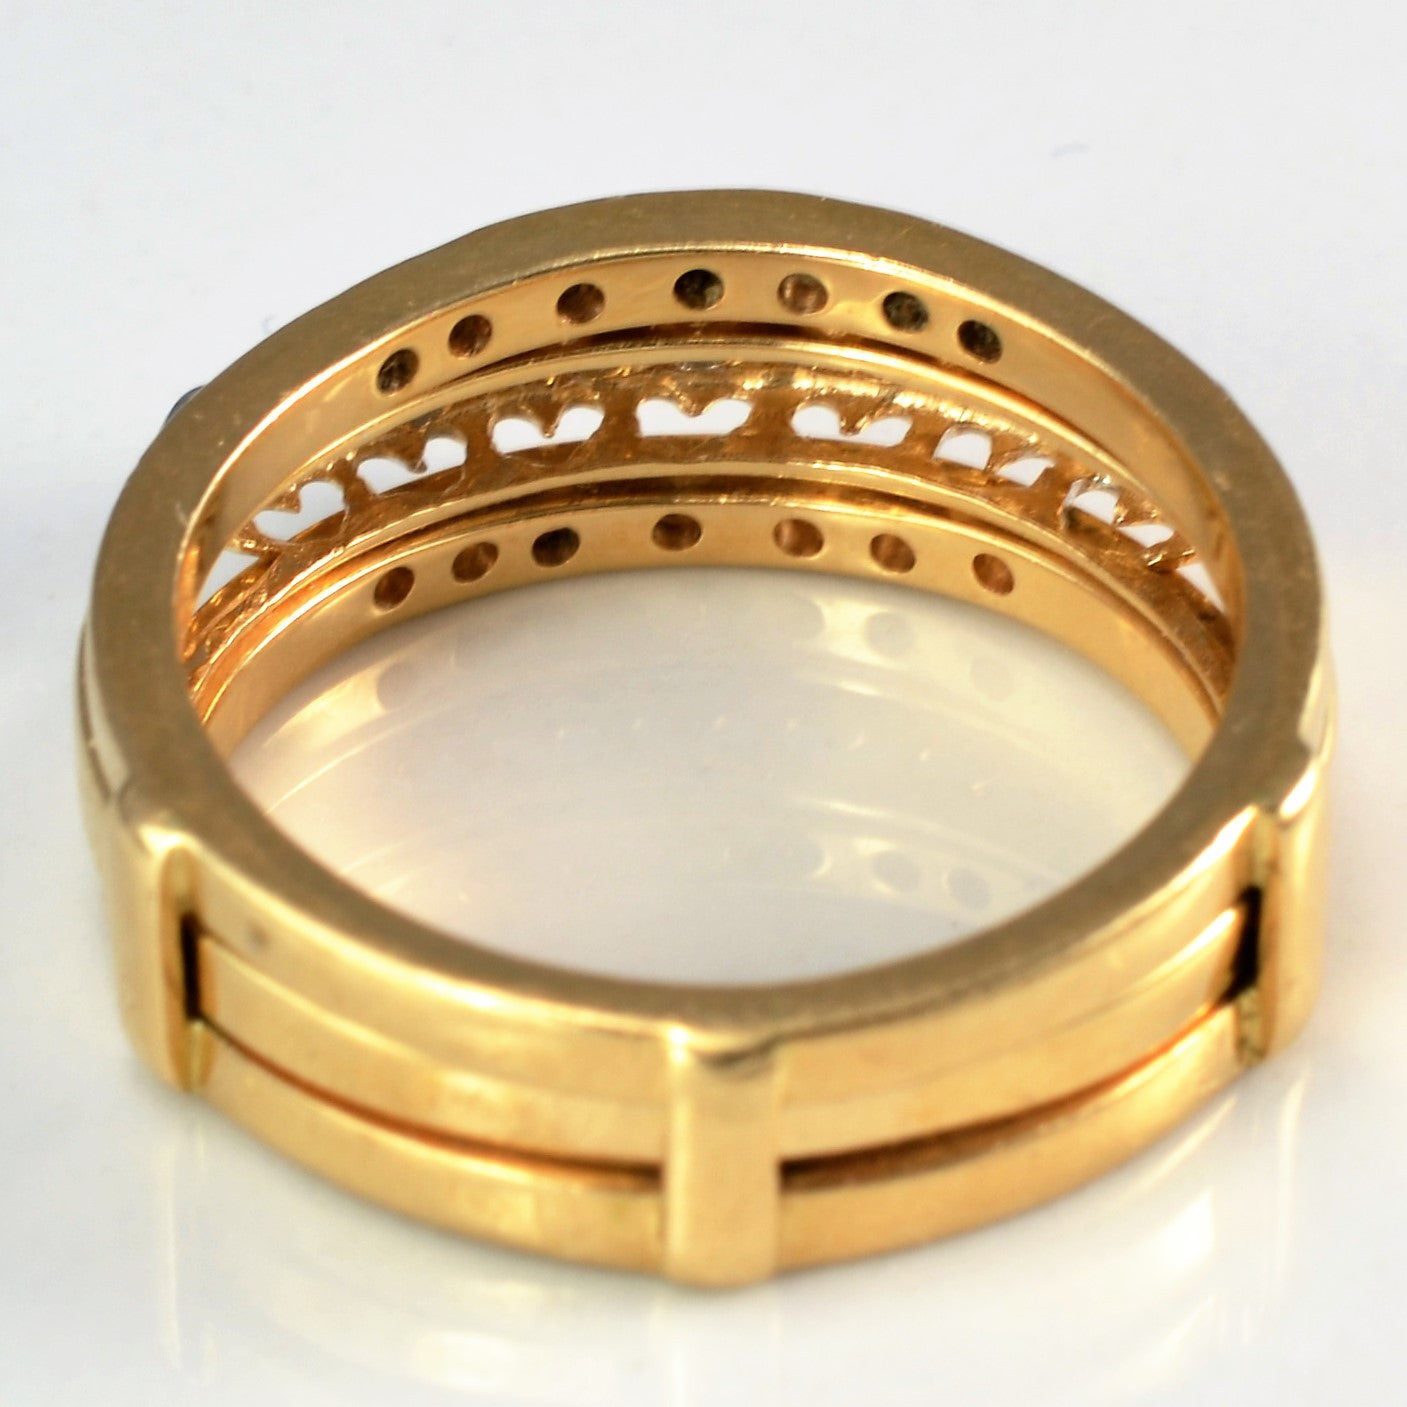 Channel Set Ring Enhancer With Diamond Band | 0.20 ctw, SZ 6.75 |